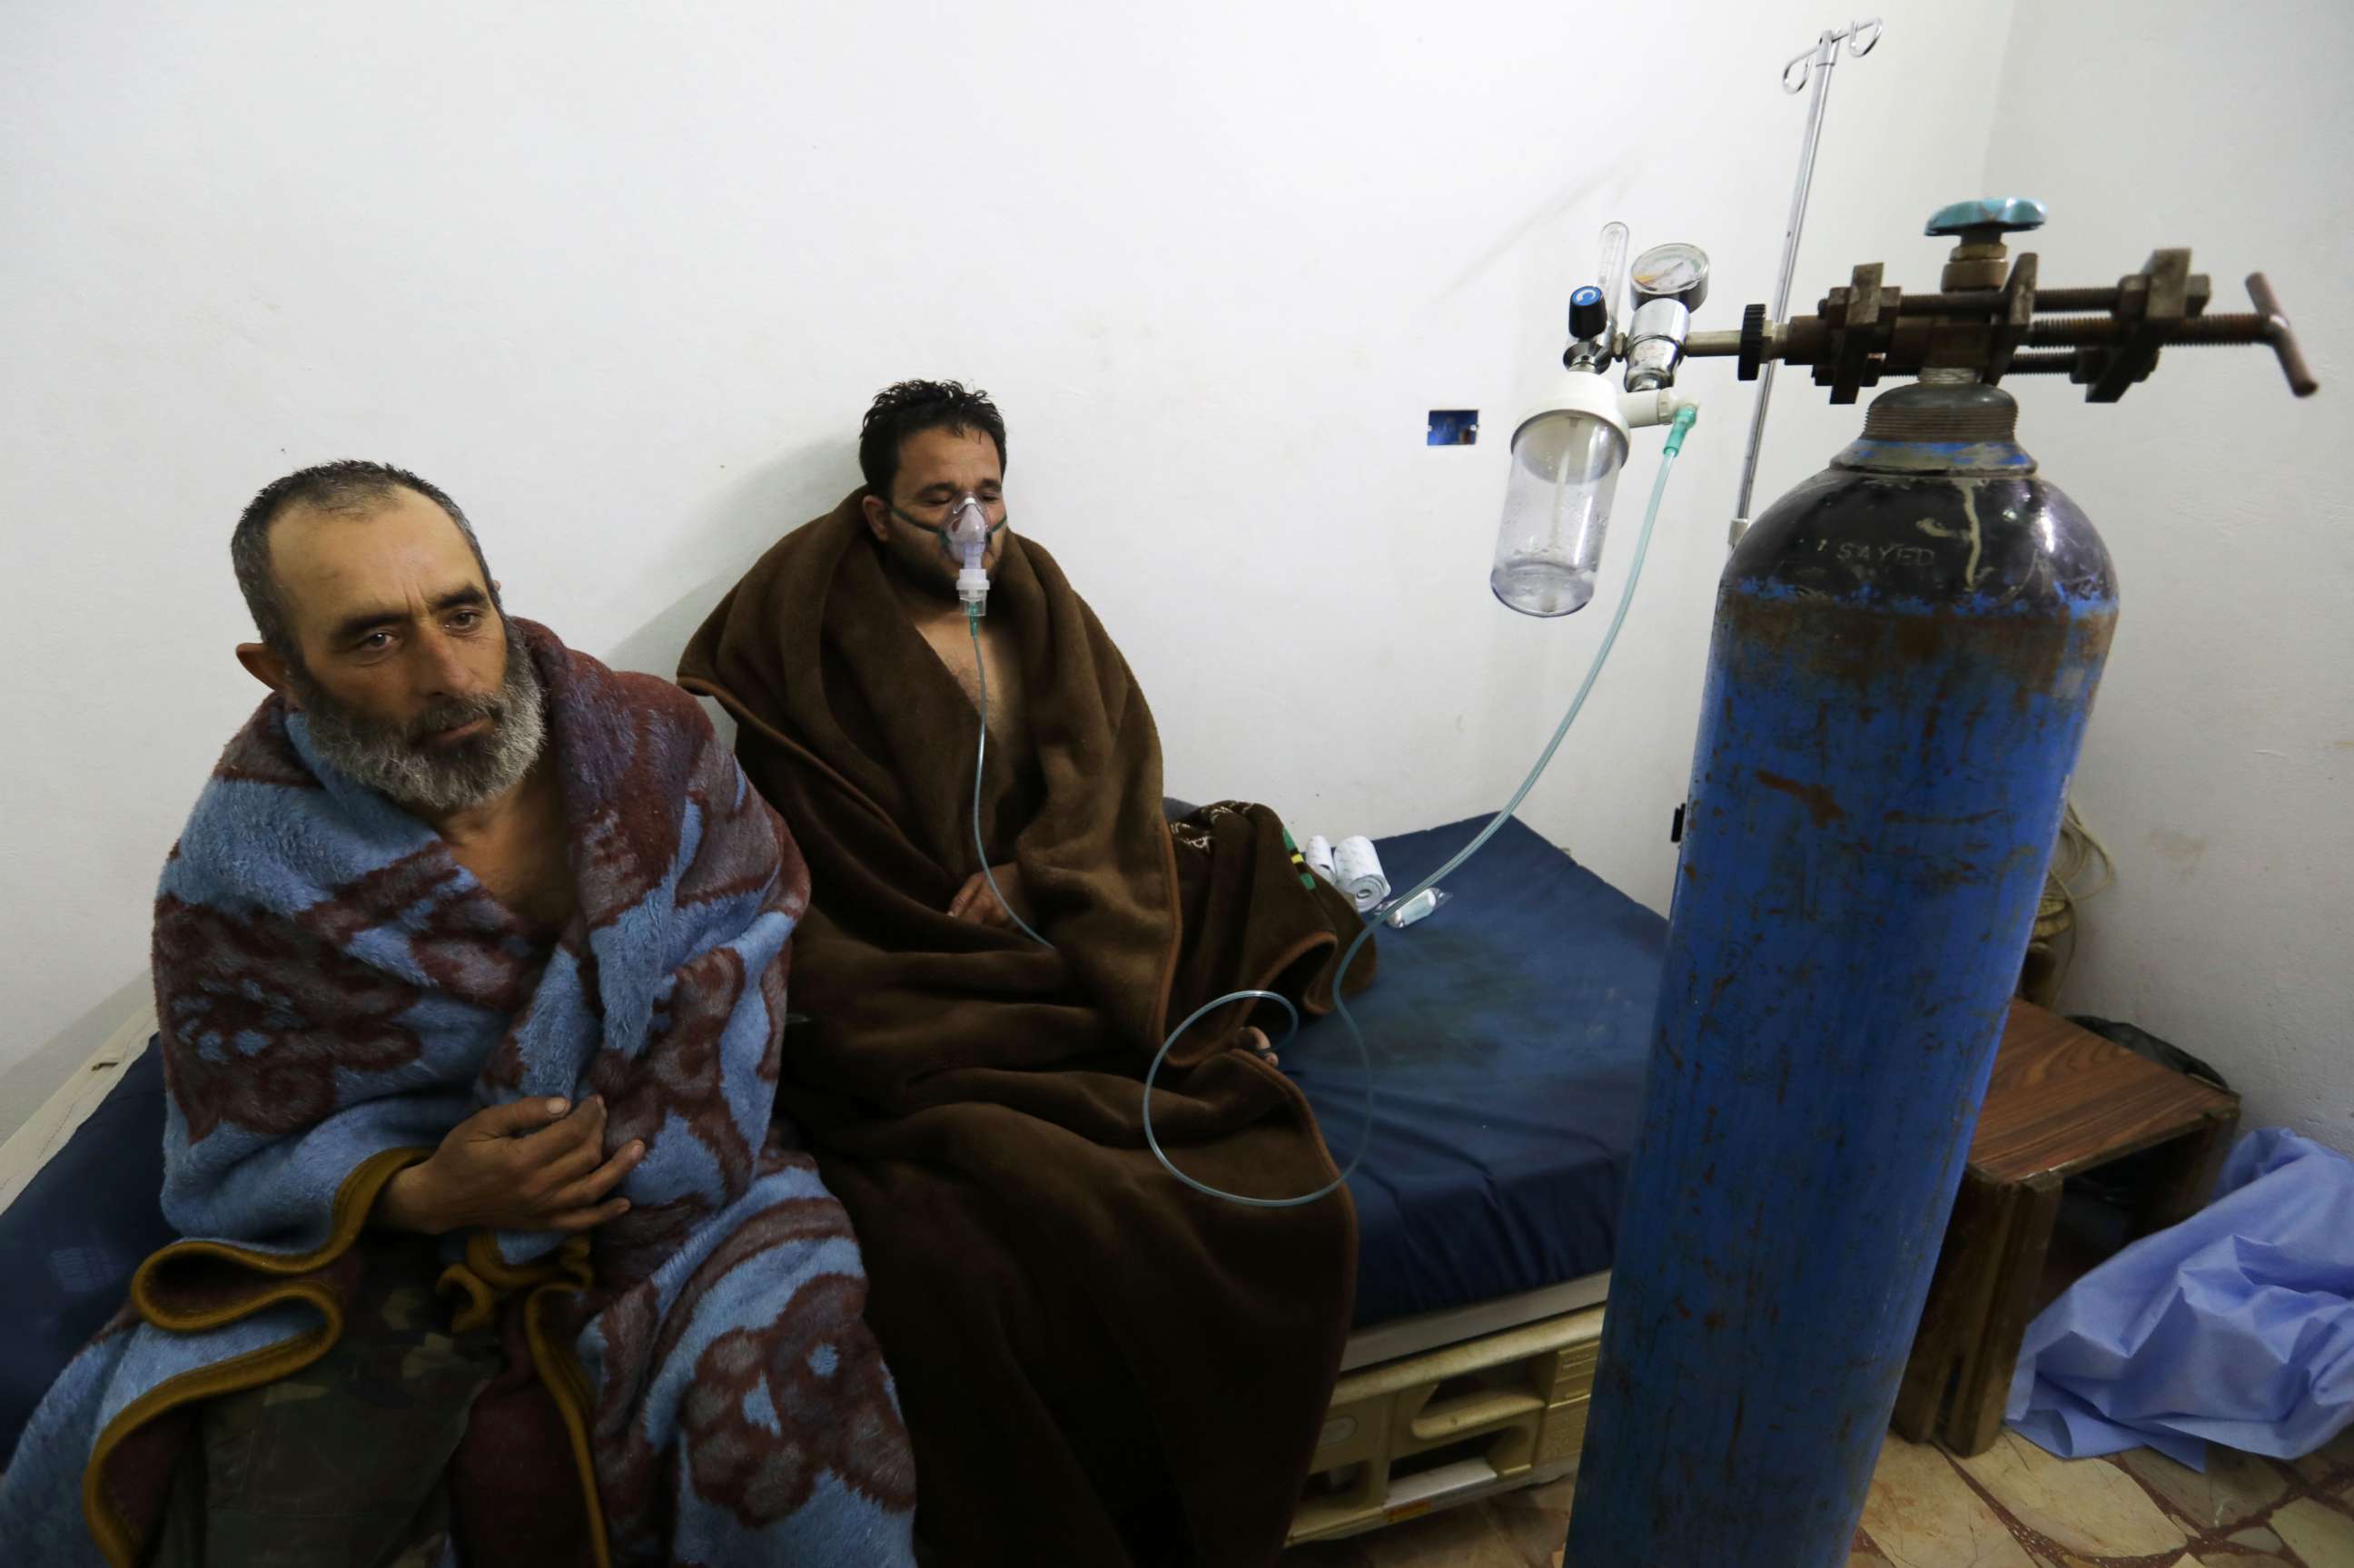 PHOTO: Syrians reportedly suffering from breathing difficulties following Syrian regime air strikes on the northwestern town of Saraqeb, rest at a field hospital in a village on the outskirts of Saraqeb, Feb. 4, 2018.
